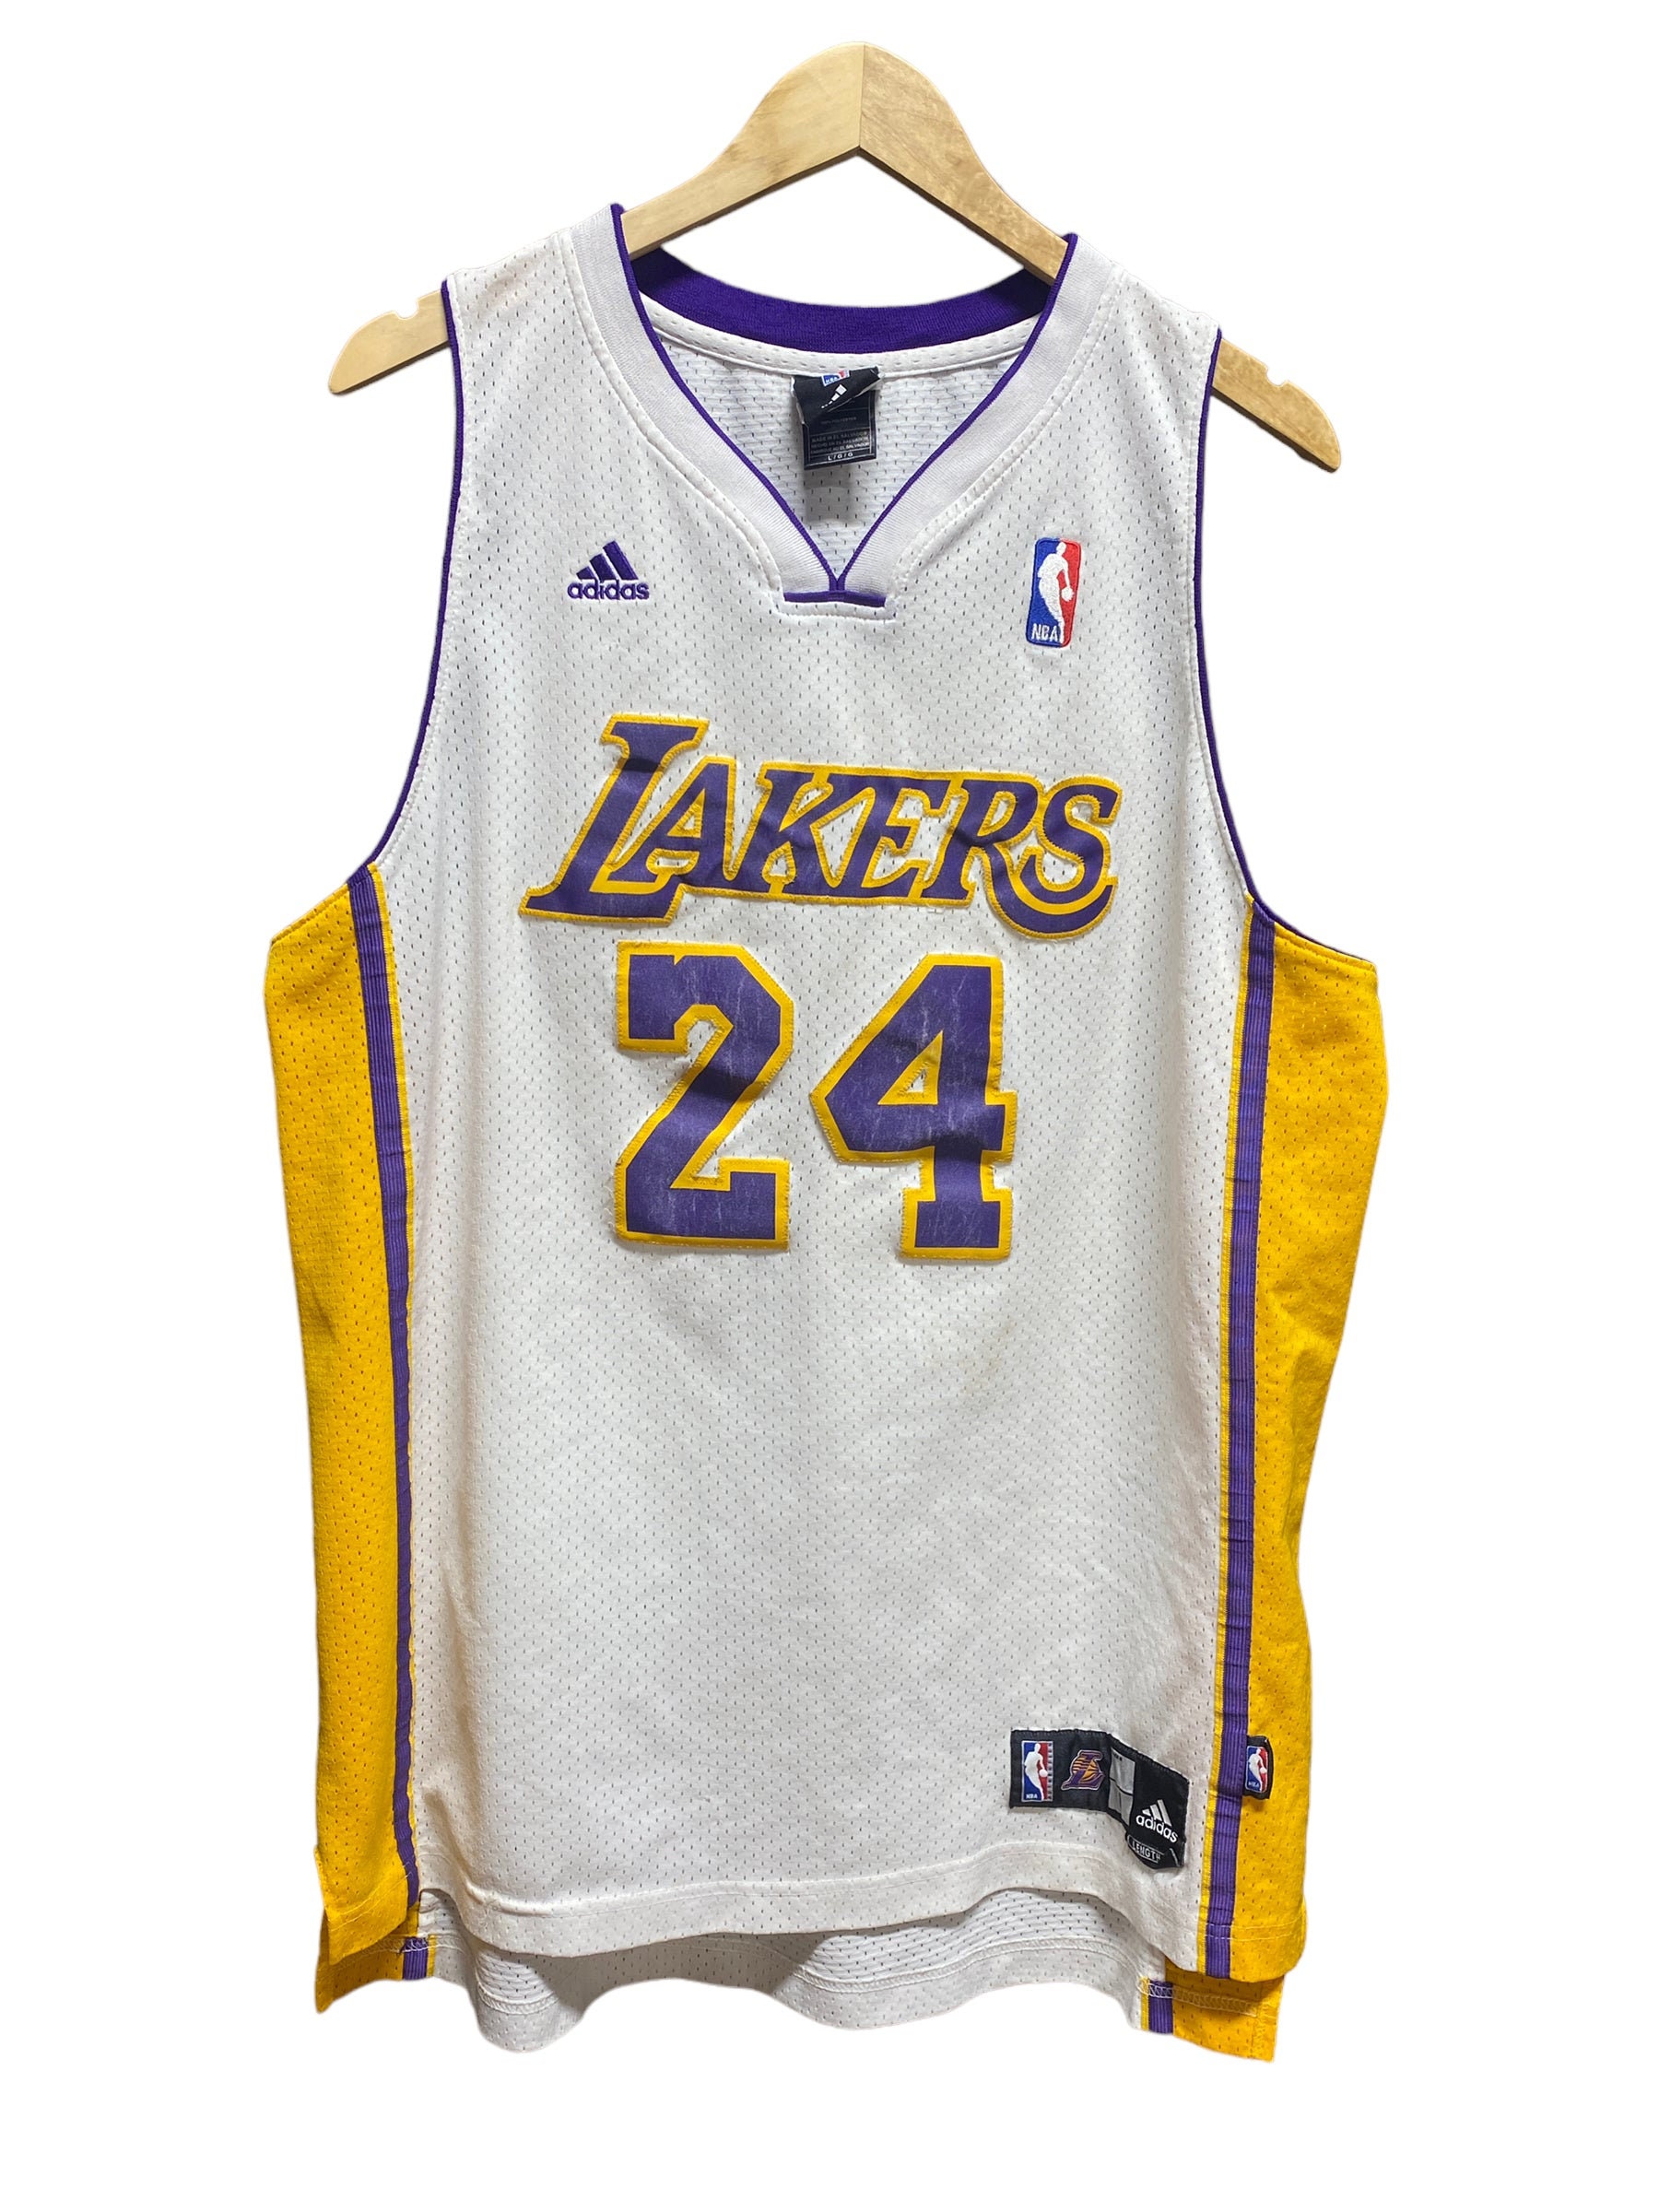 Kobe Bryant Jersey Buying Guide (Lakers) (All Star)